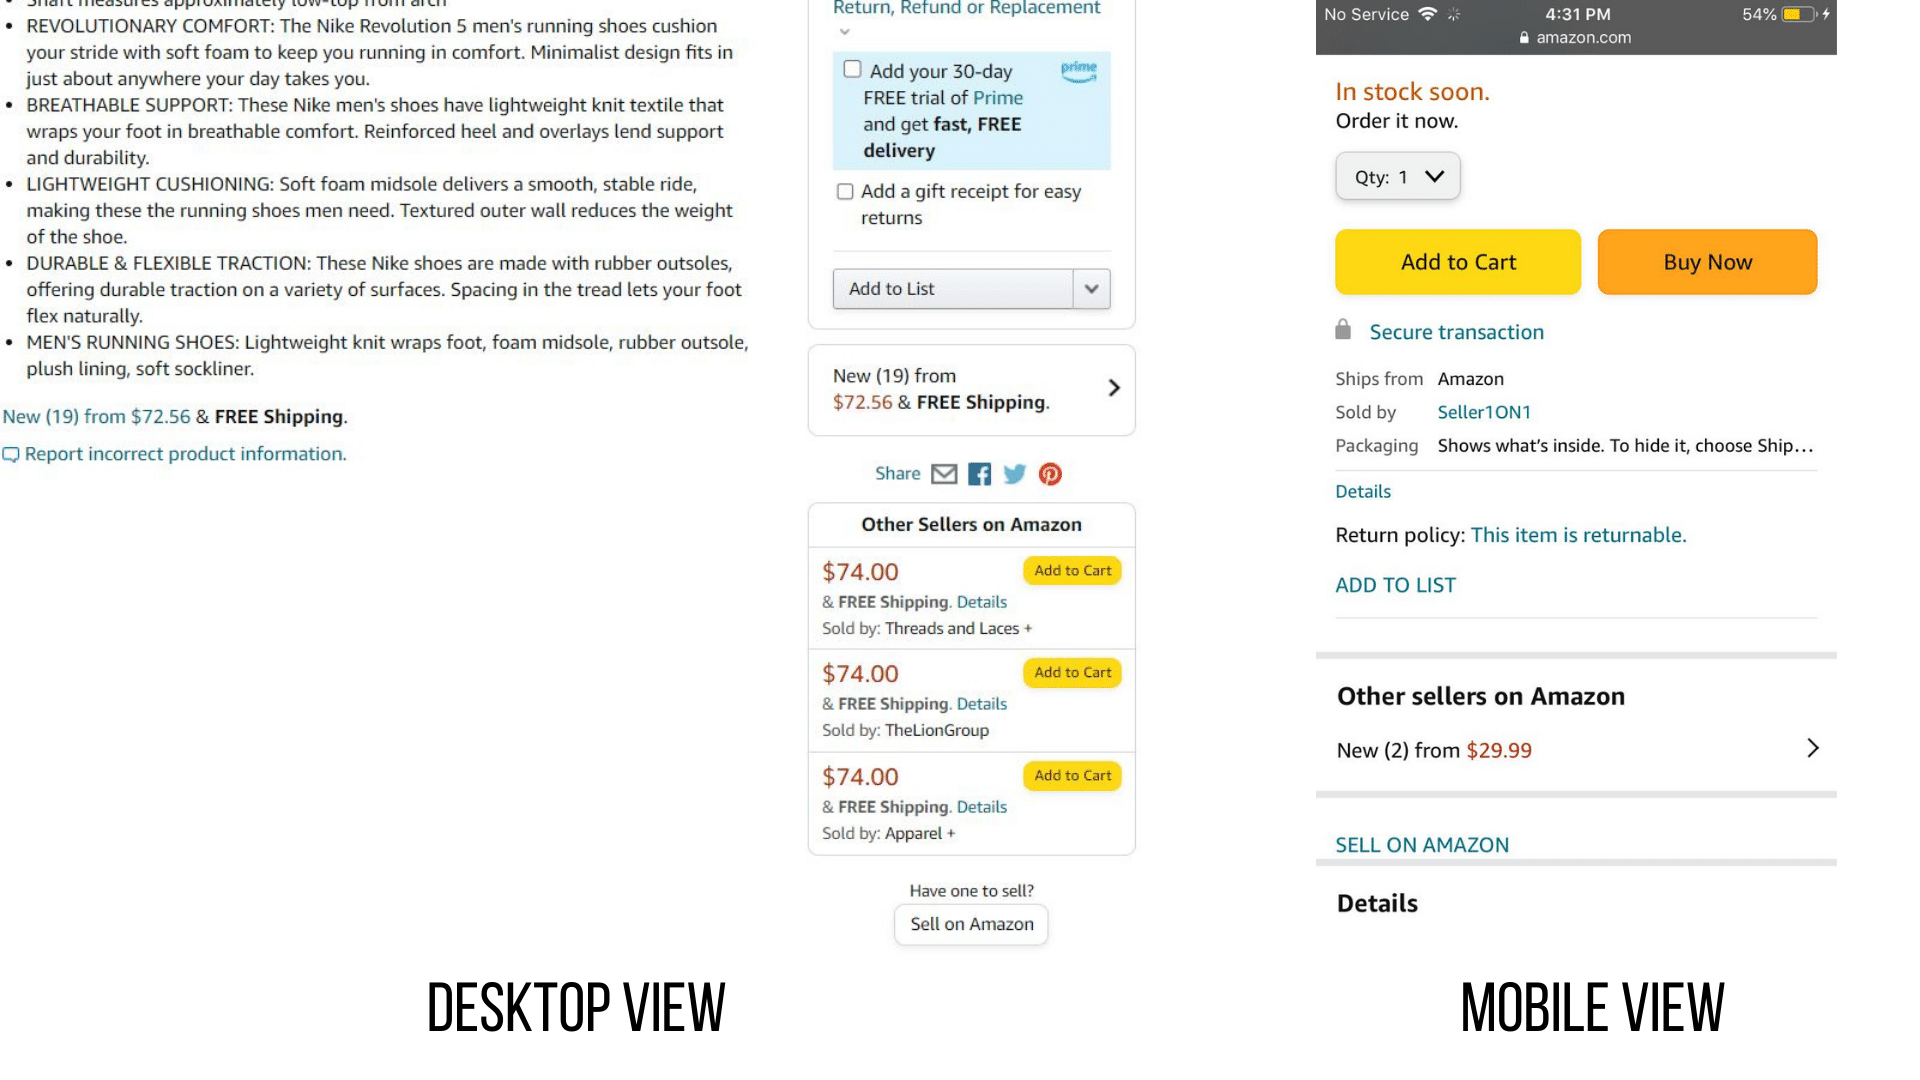 side by side mobile view vs desktop view